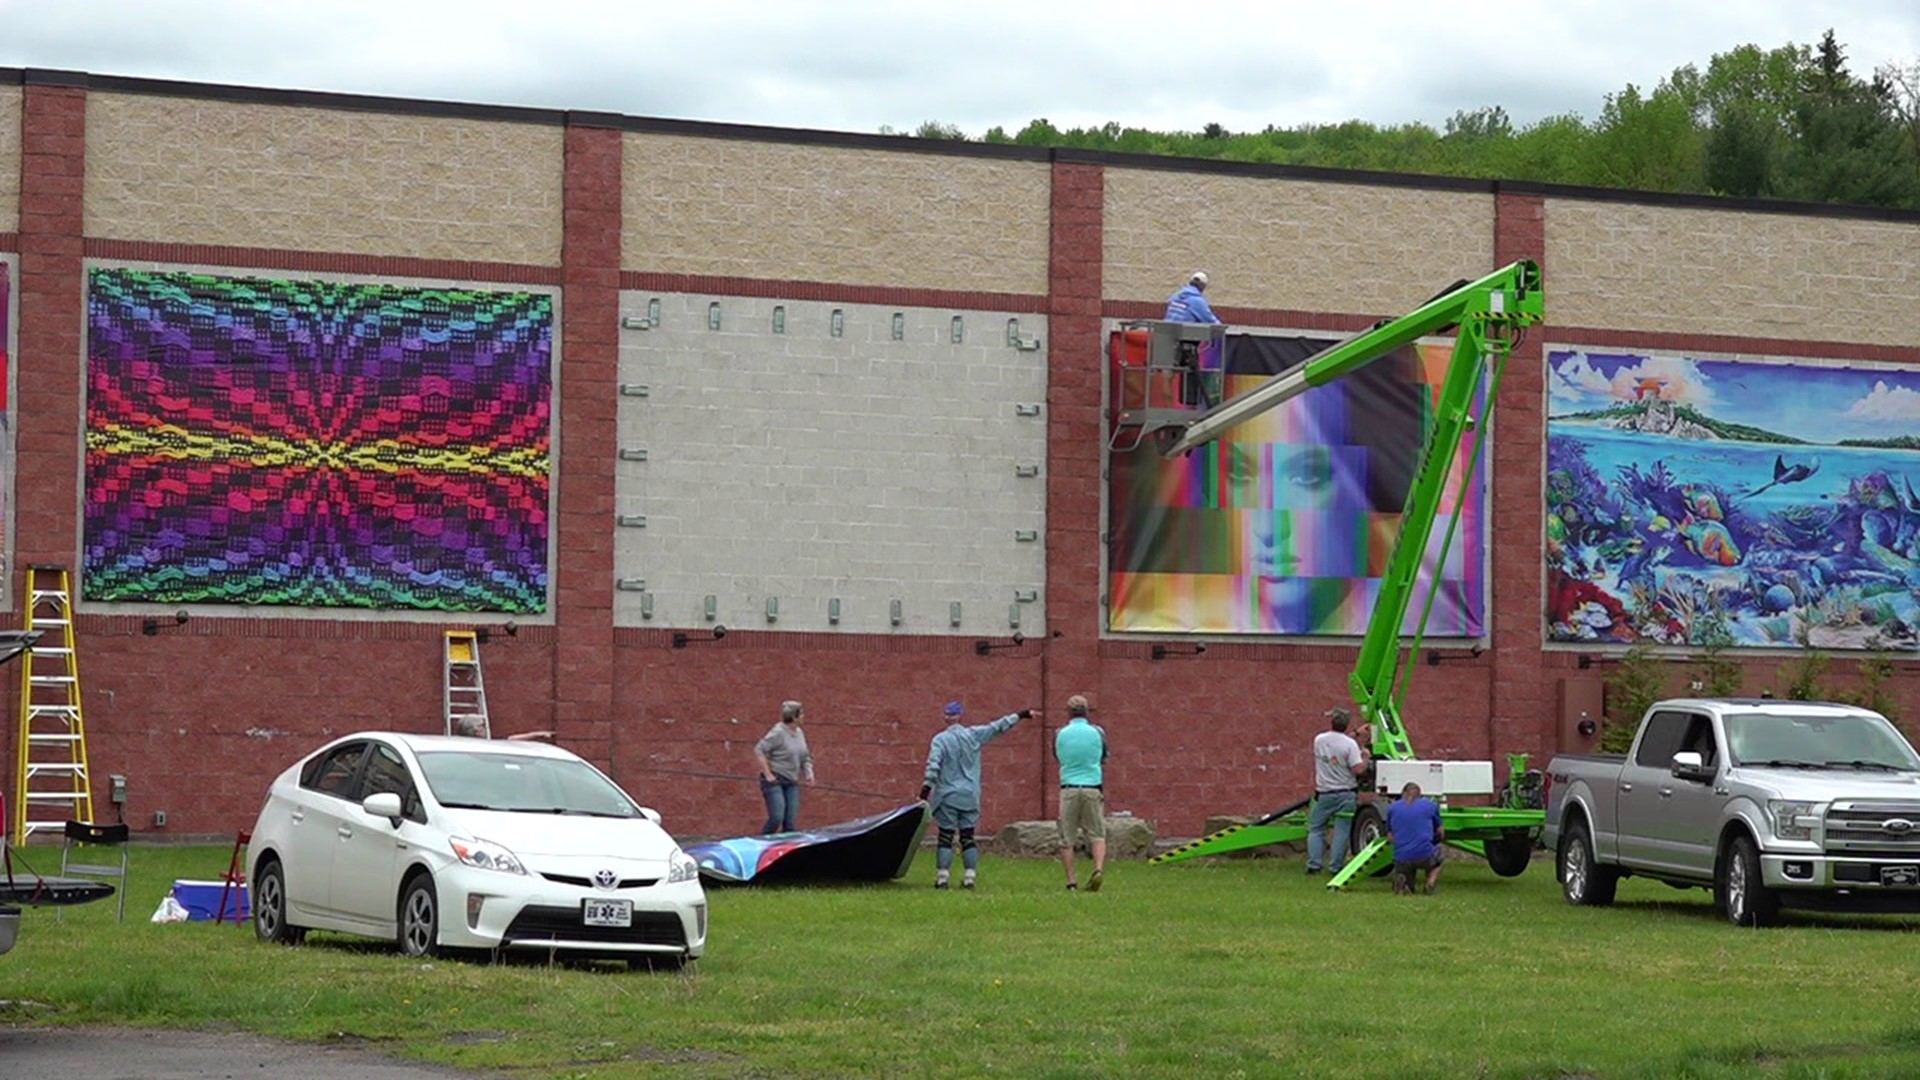 The Wayne County Arts Alliance is showing off art on larger-than-life canvases as they installed the 2022 edition of The Great Wall of Honesdale.